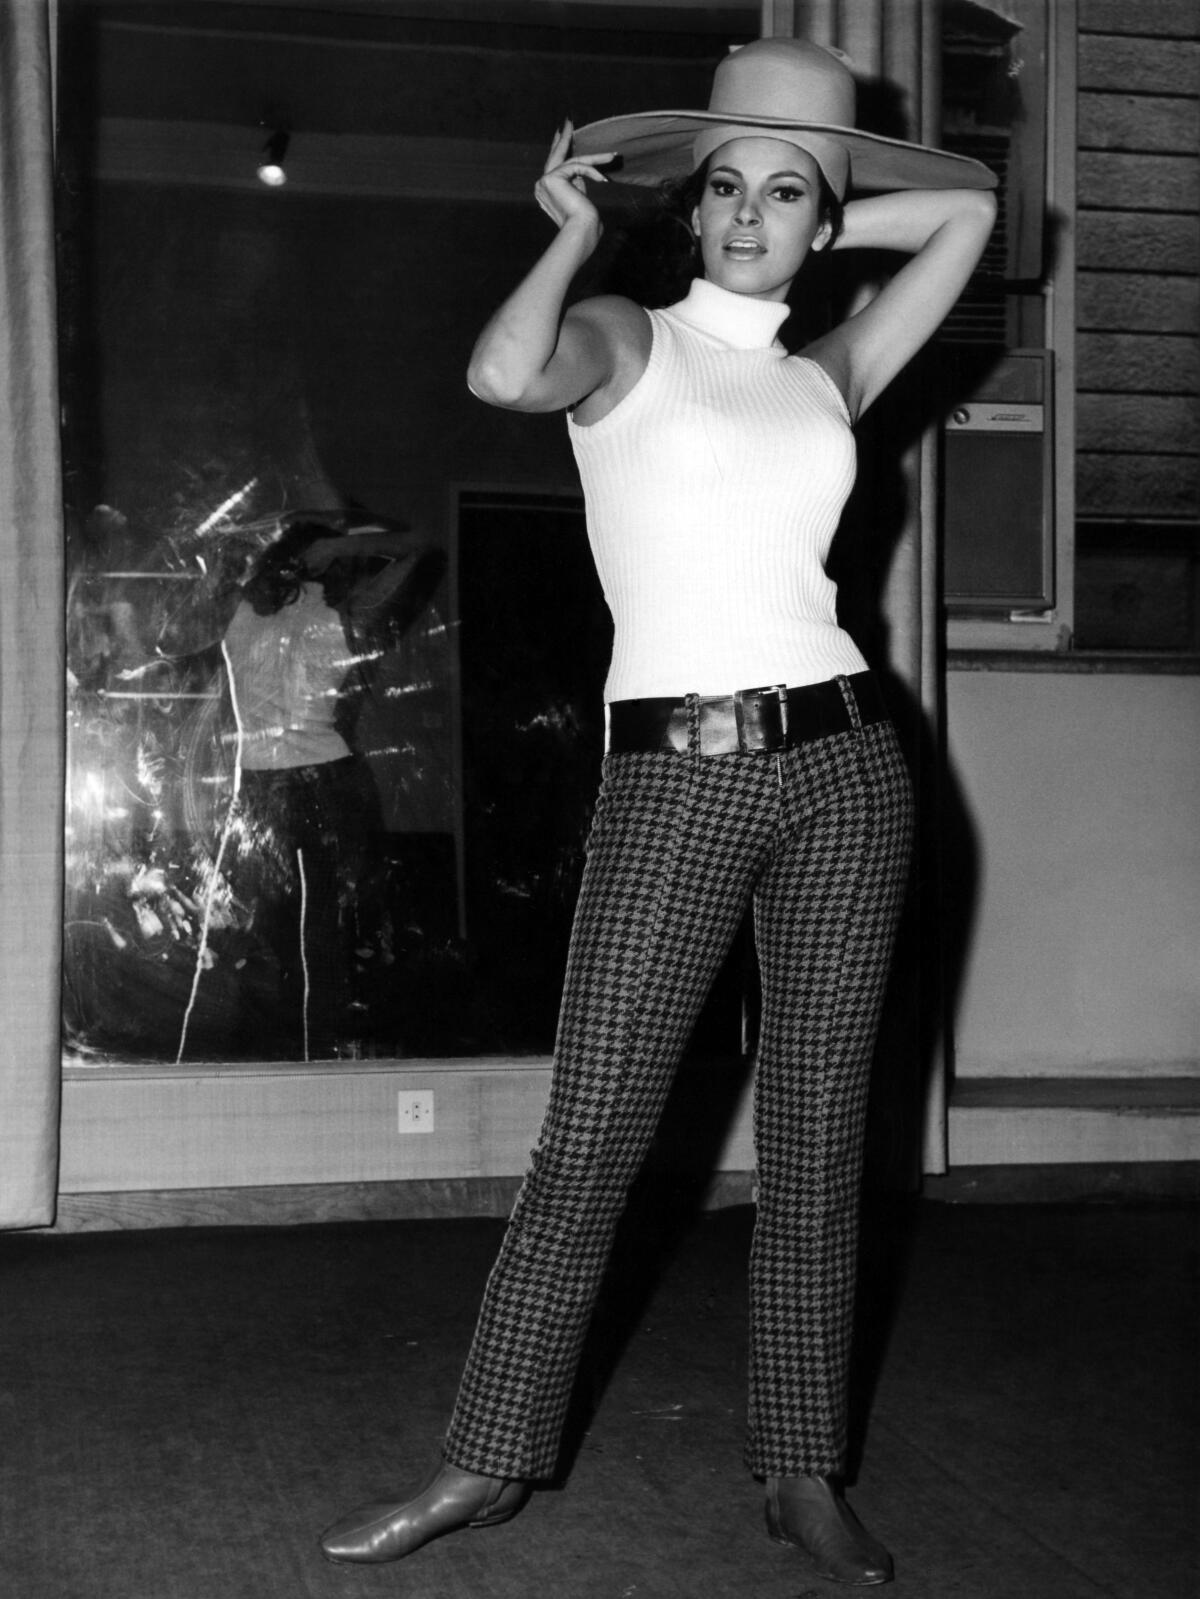 Woman wearing a wide-brimmed hat and white tank top turtle neck, plaid pants and boots in black and white photo